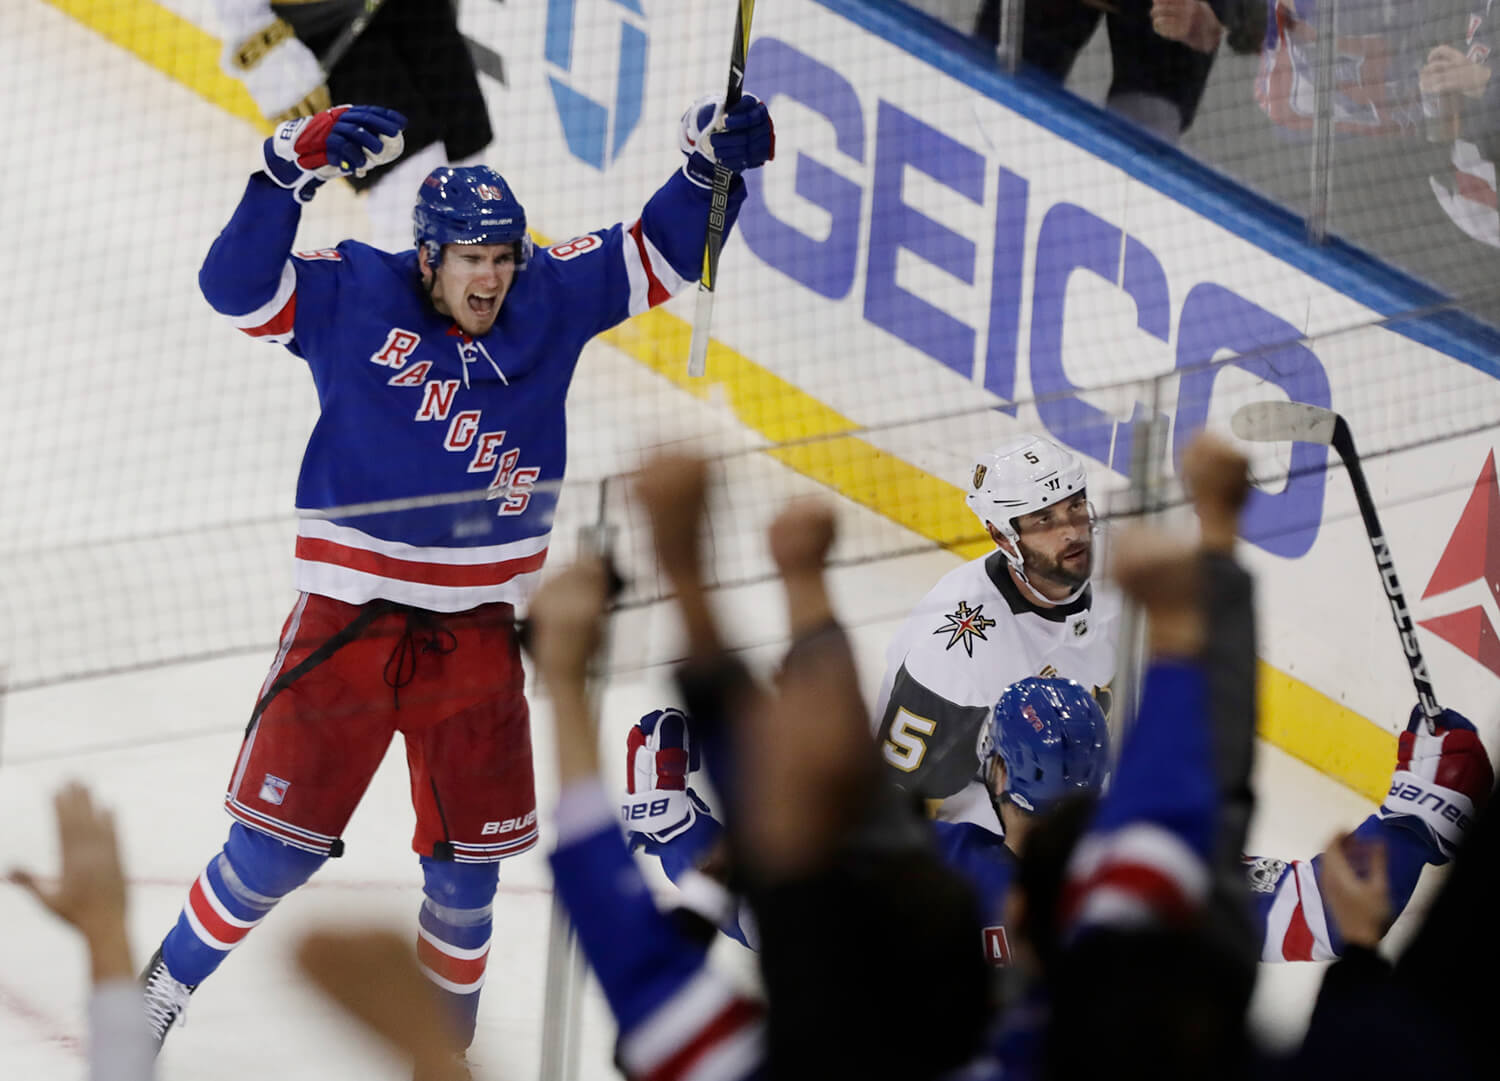 On a dark day, Rangers lift a city with win